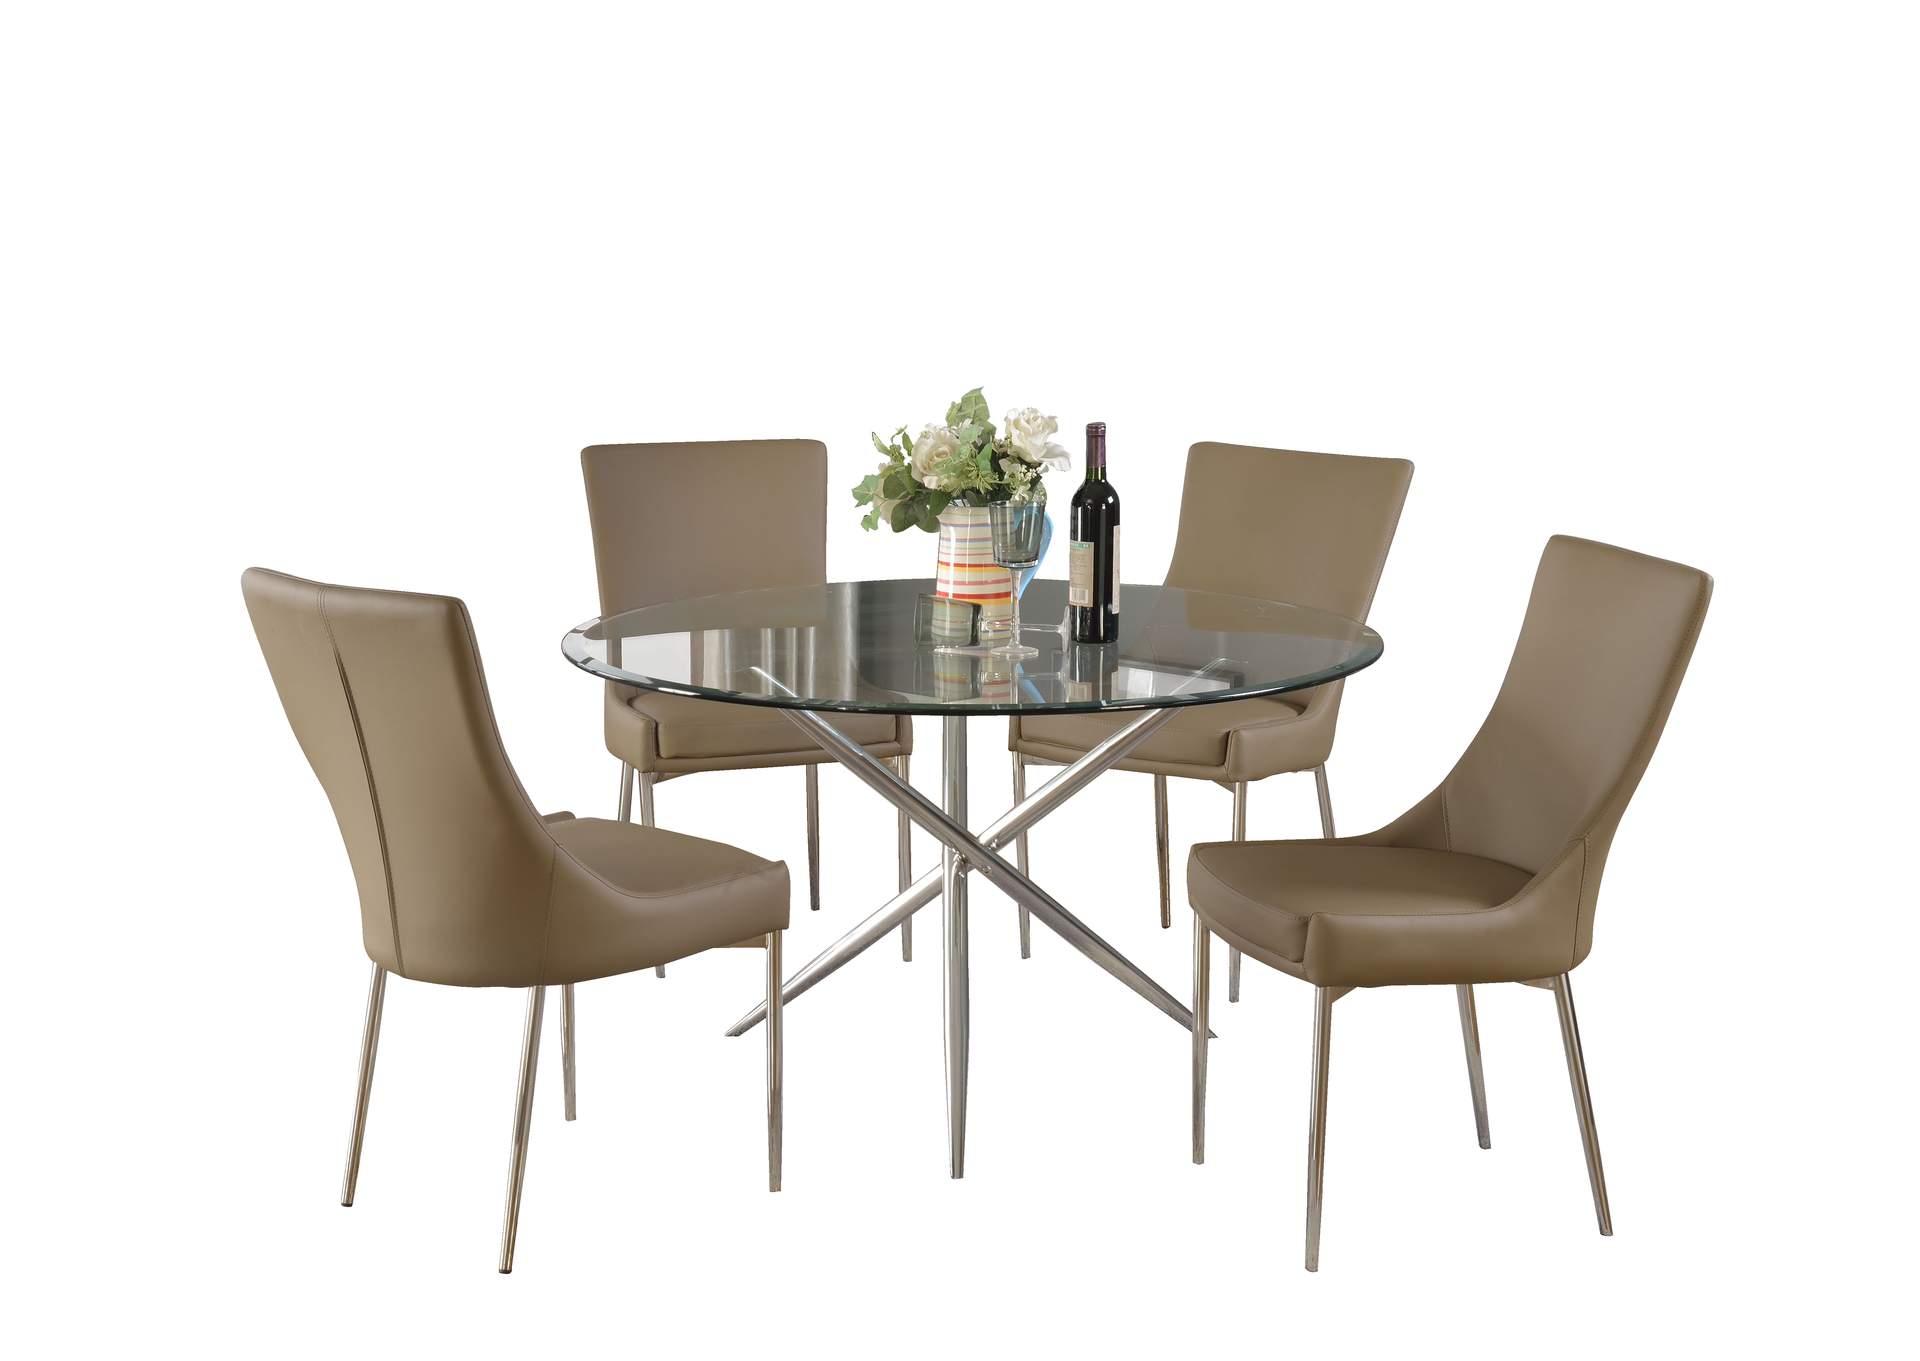 Contemporary Dining Set w/ Round Glass Table and Club-Style Chairs,Chintaly Imports